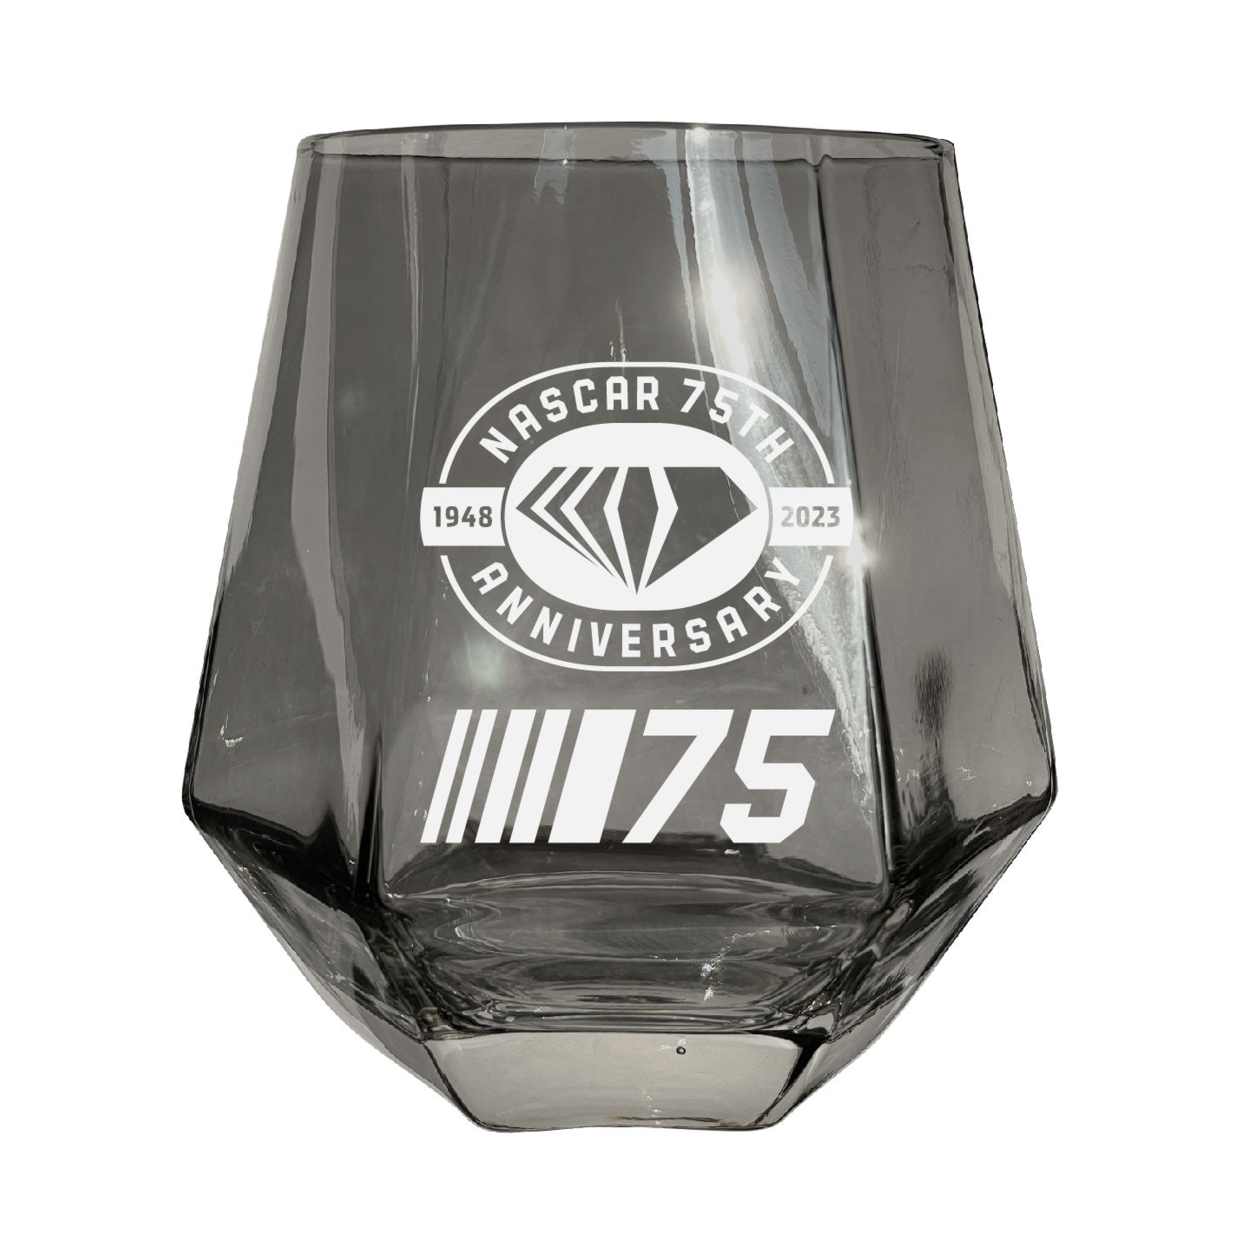 NASCAR 75 Year Anniversary Officially Licensed 10 Oz Engraved Diamond Glass - Grey, 2-Pack